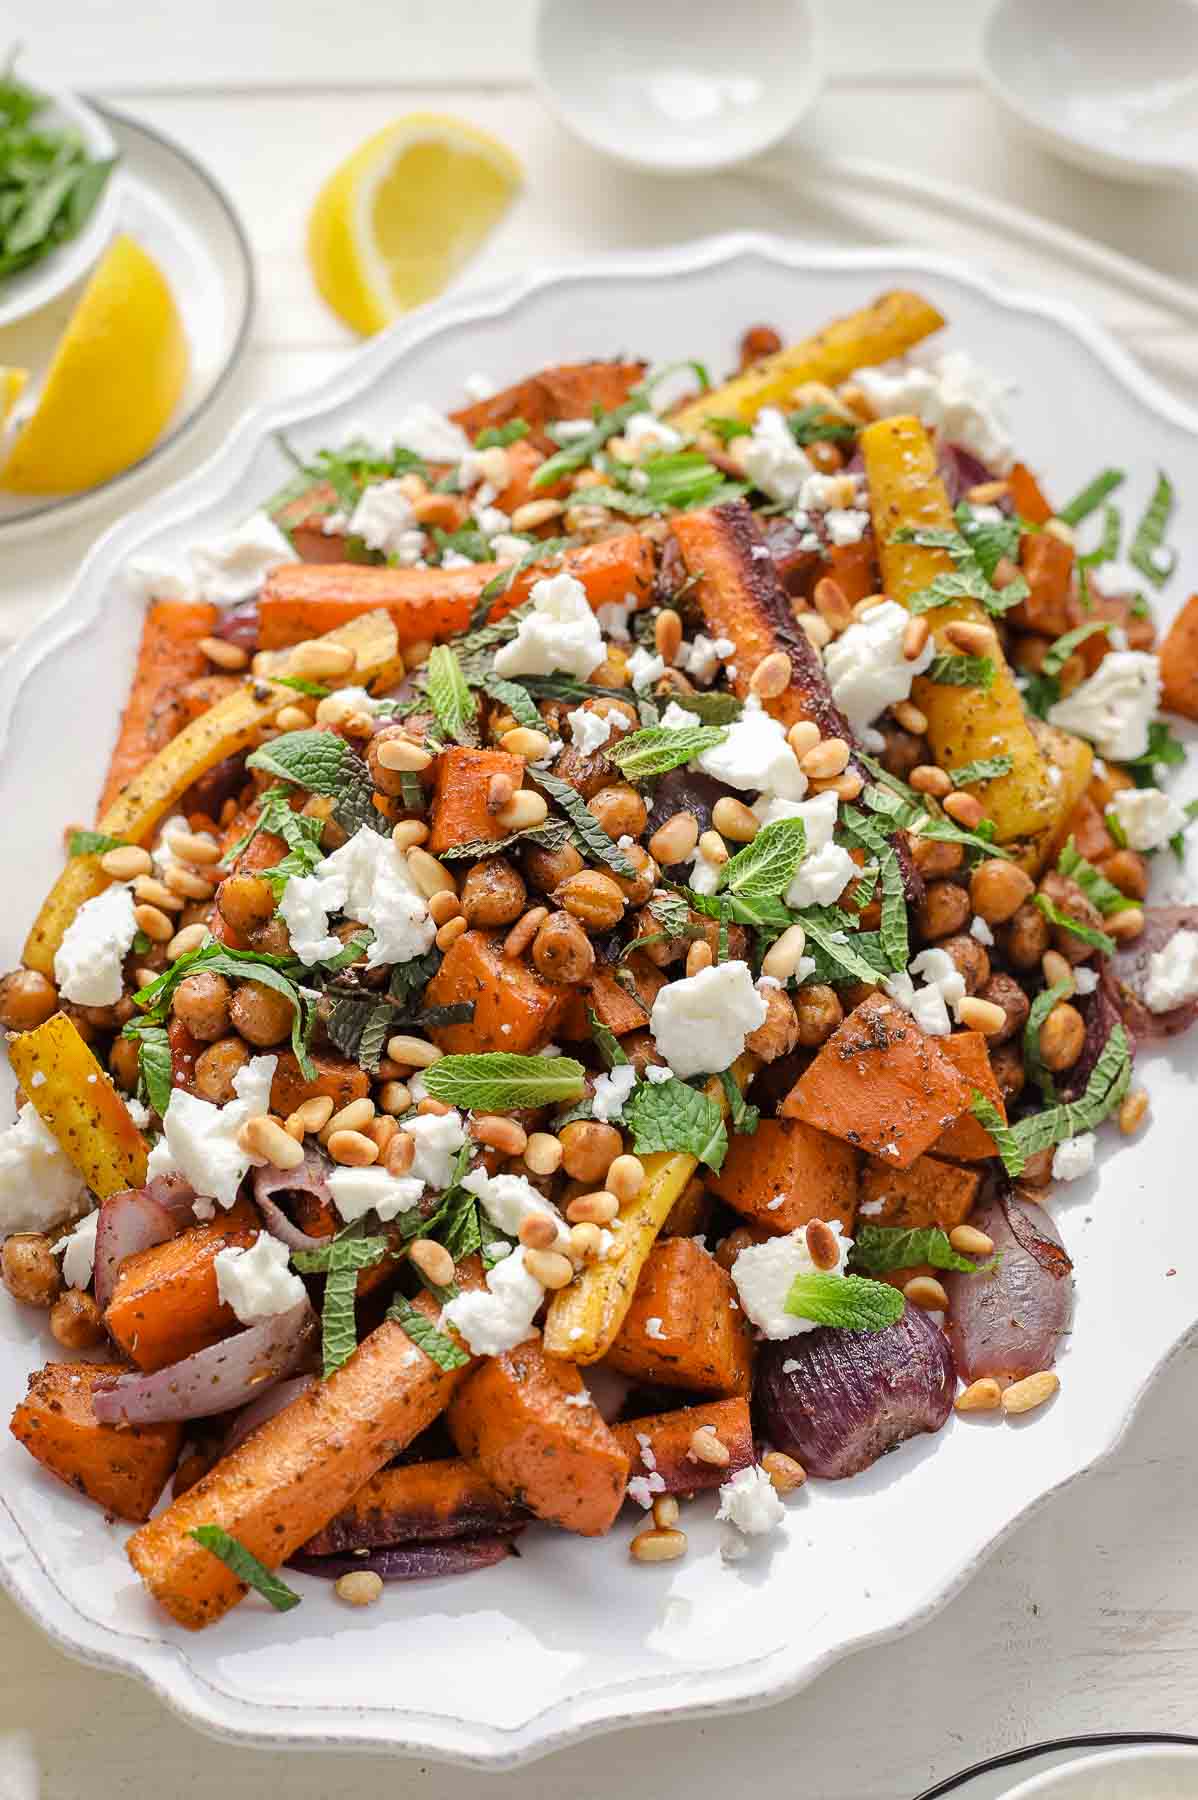 Roasted Vegetable and Chickpeas with Za’atar, Mint and Feta